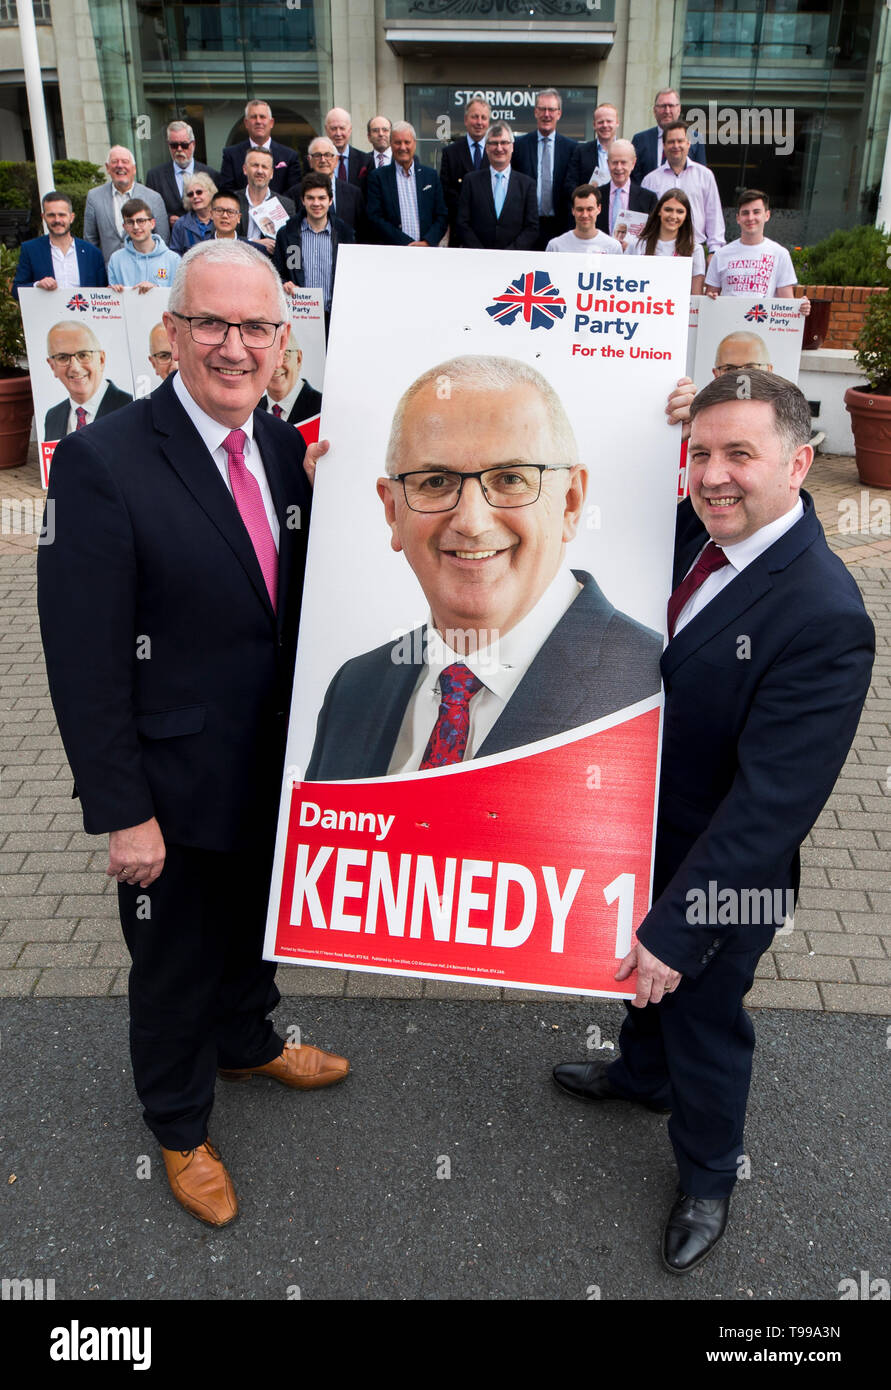 Danny Kennedy (left) with his election poster and UUP party leader Robin Swann, after launching the Ulster Unionist Party manifesto for the 2019 European election at the Stormont Hotel in Belfast. Stock Photo